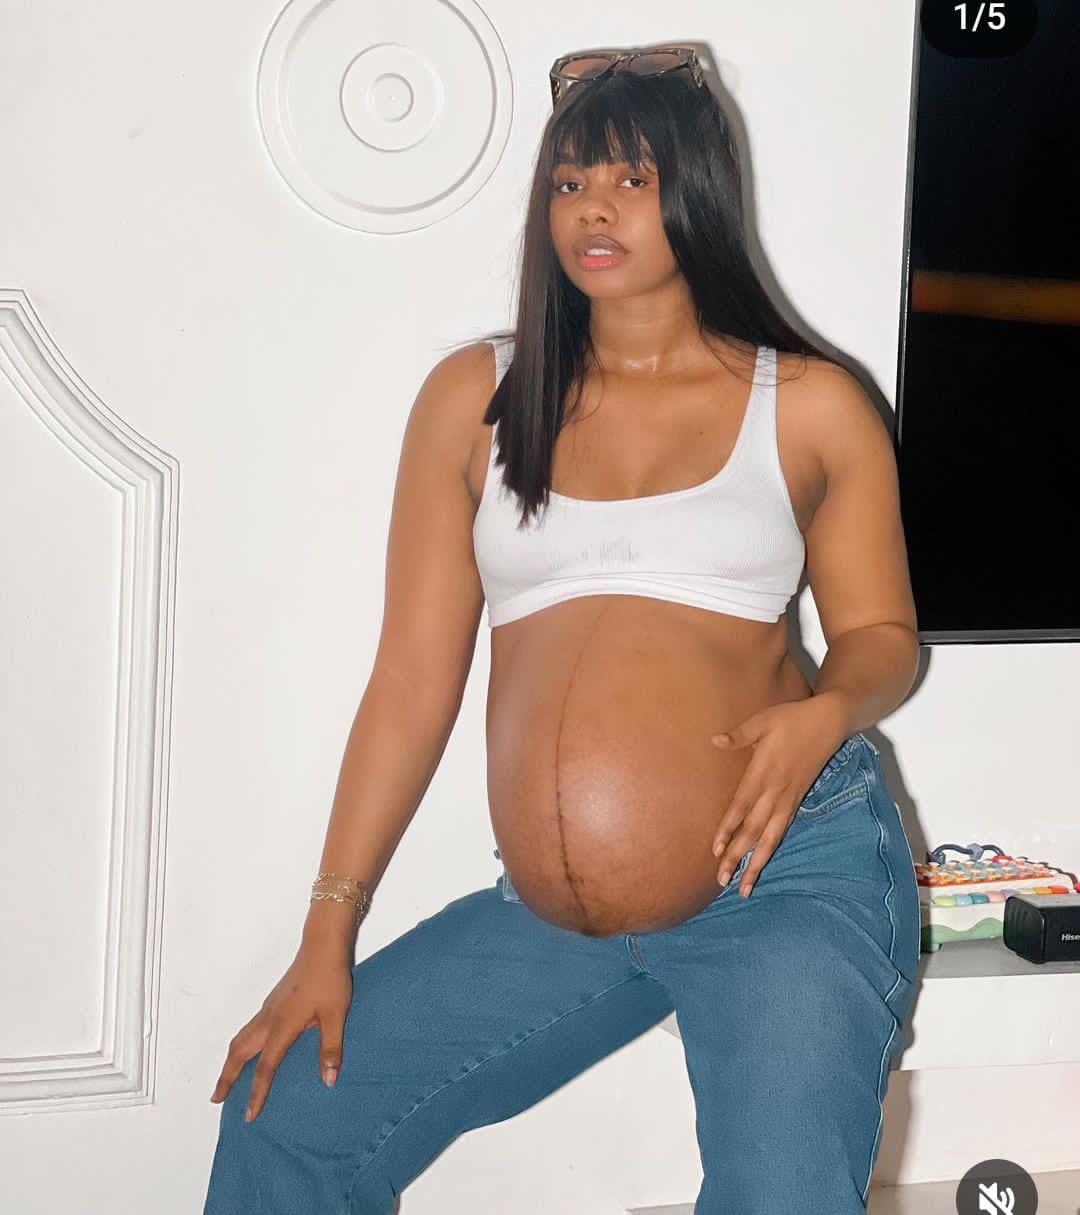 Instagram Model, Janemena Shows Her Daughter Online For The First Time (VIDEO)